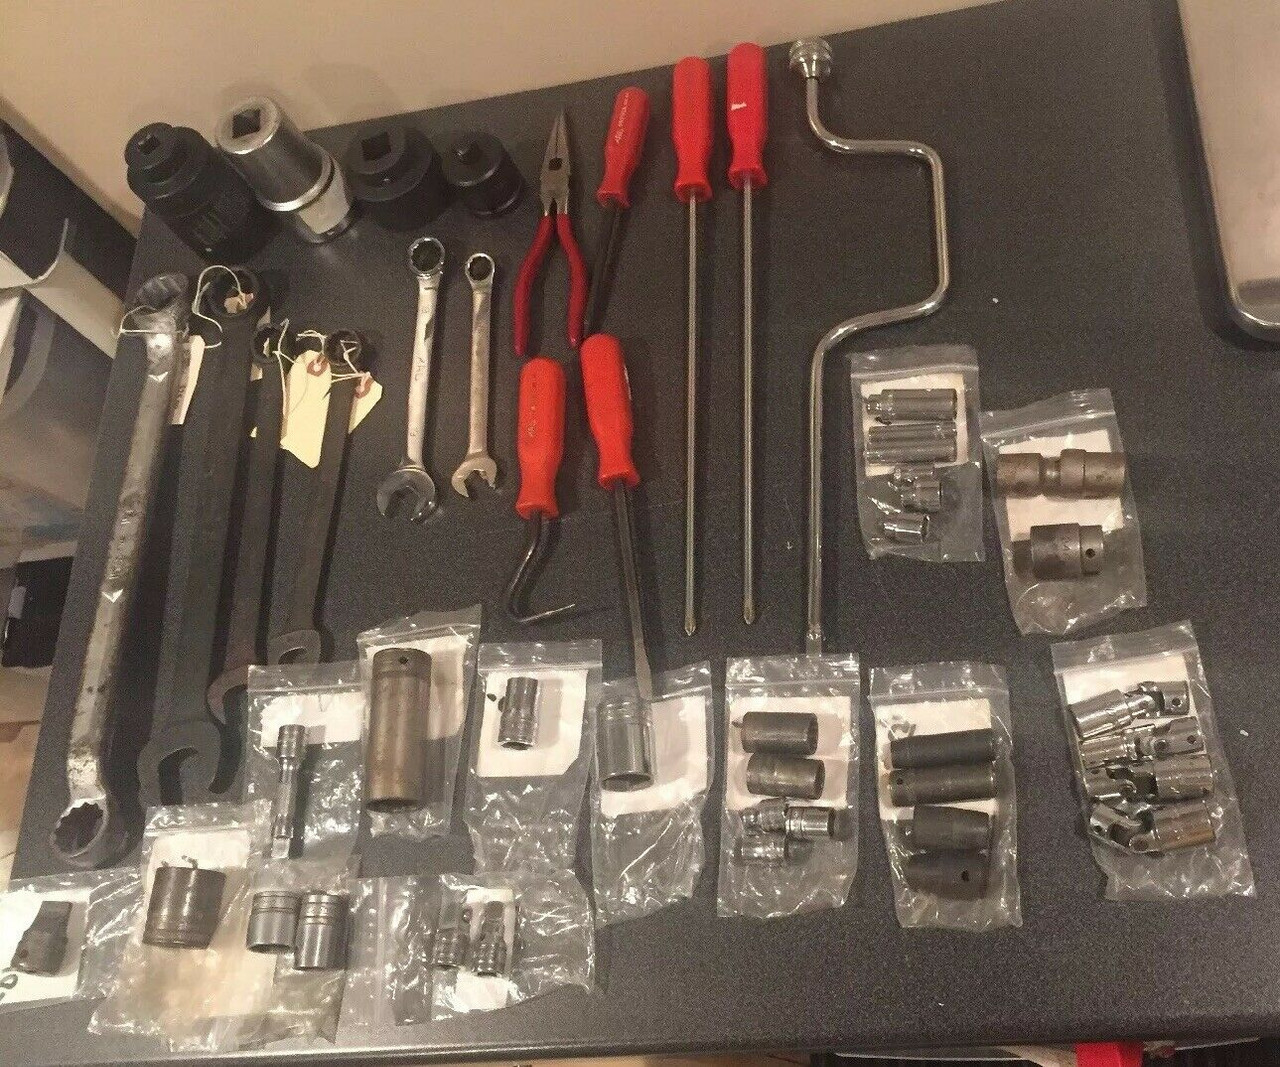  Snap-On , MAC , MATCO wrenches sockets,screwdrivers USA Made Tools, shop the garage